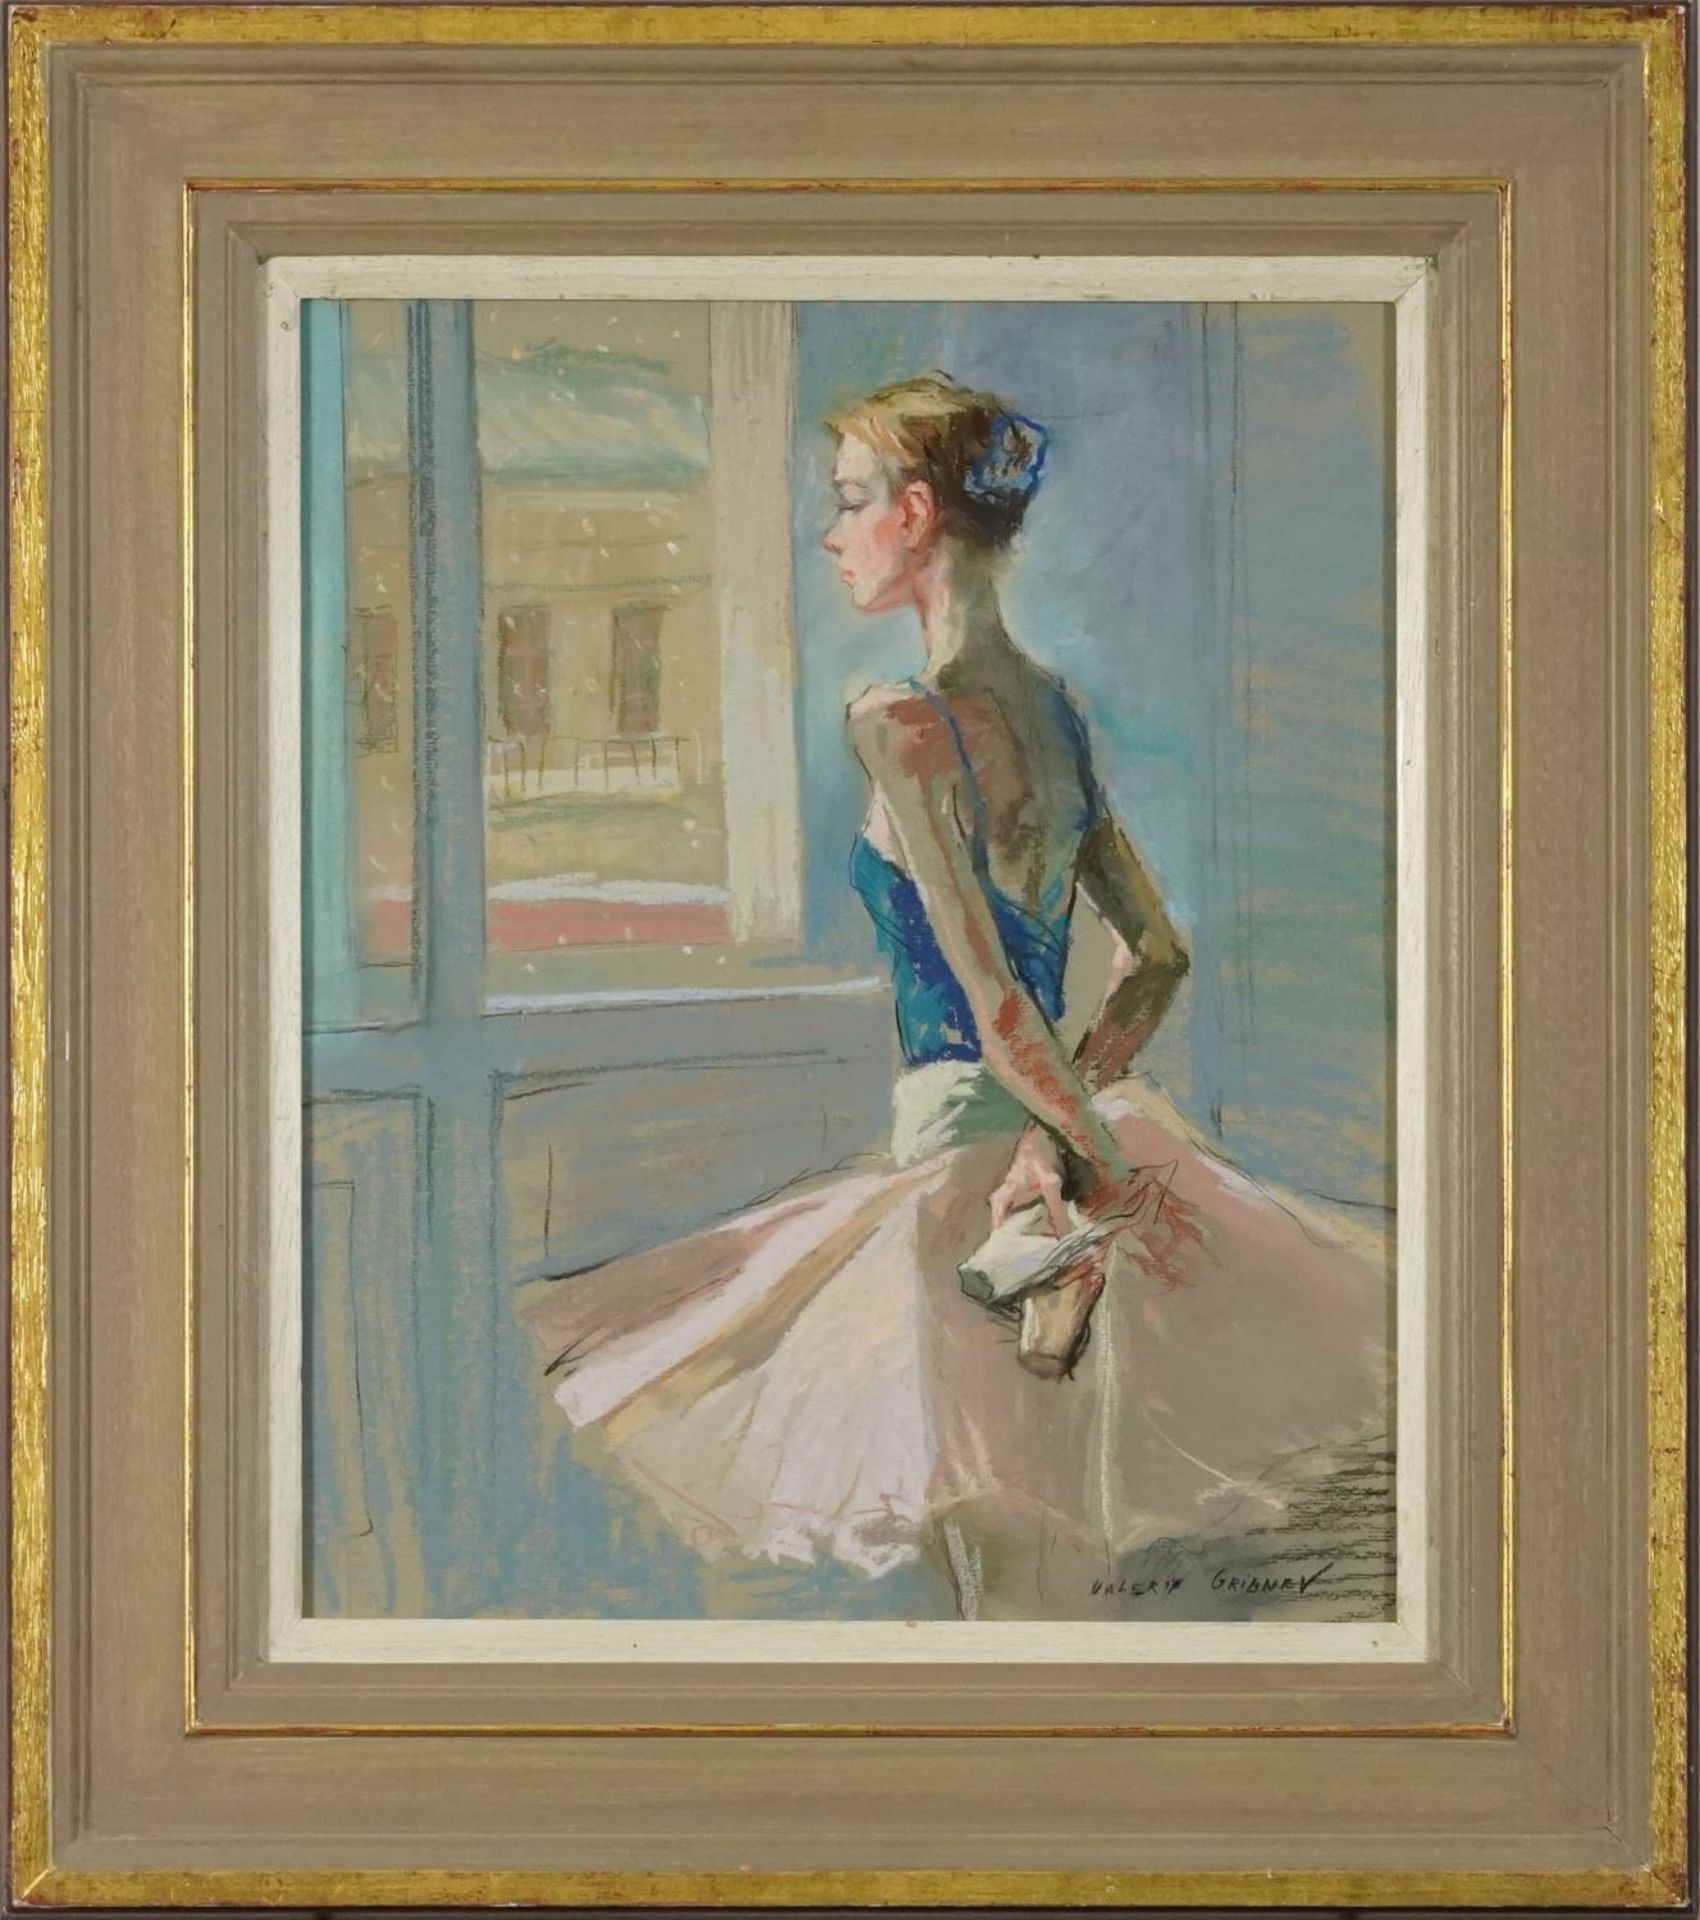 Valeriy Gridnev - Watching the snow, Russian pastel, Francis Iles label verso, mounted, framed and - Image 2 of 7